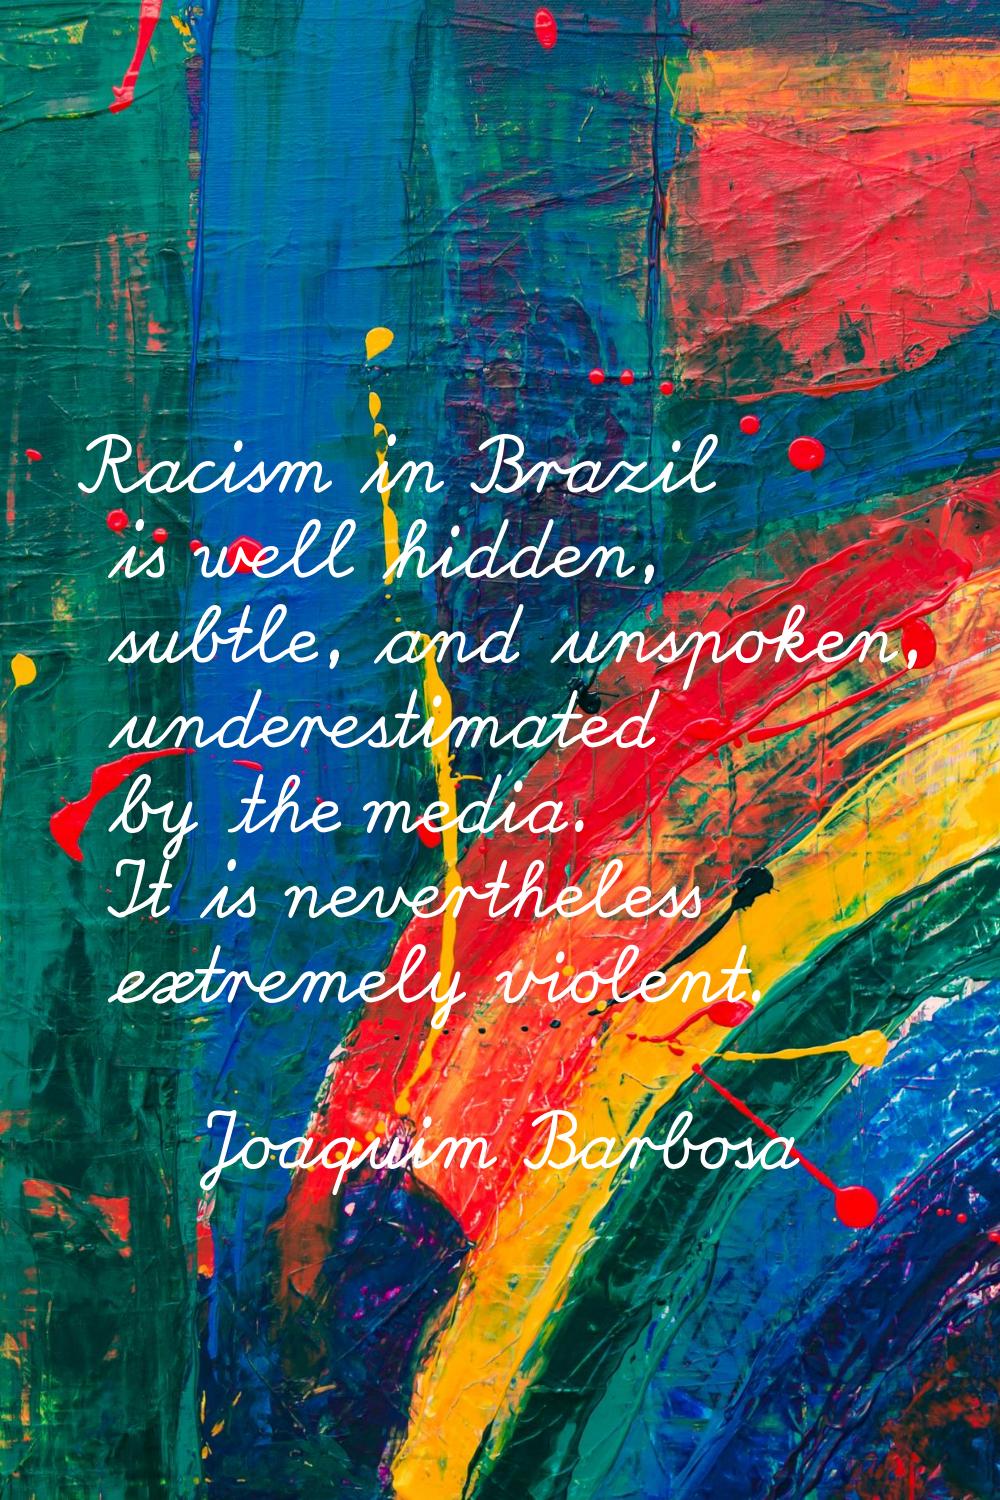 Racism in Brazil is well hidden, subtle, and unspoken, underestimated by the media. It is neverthel